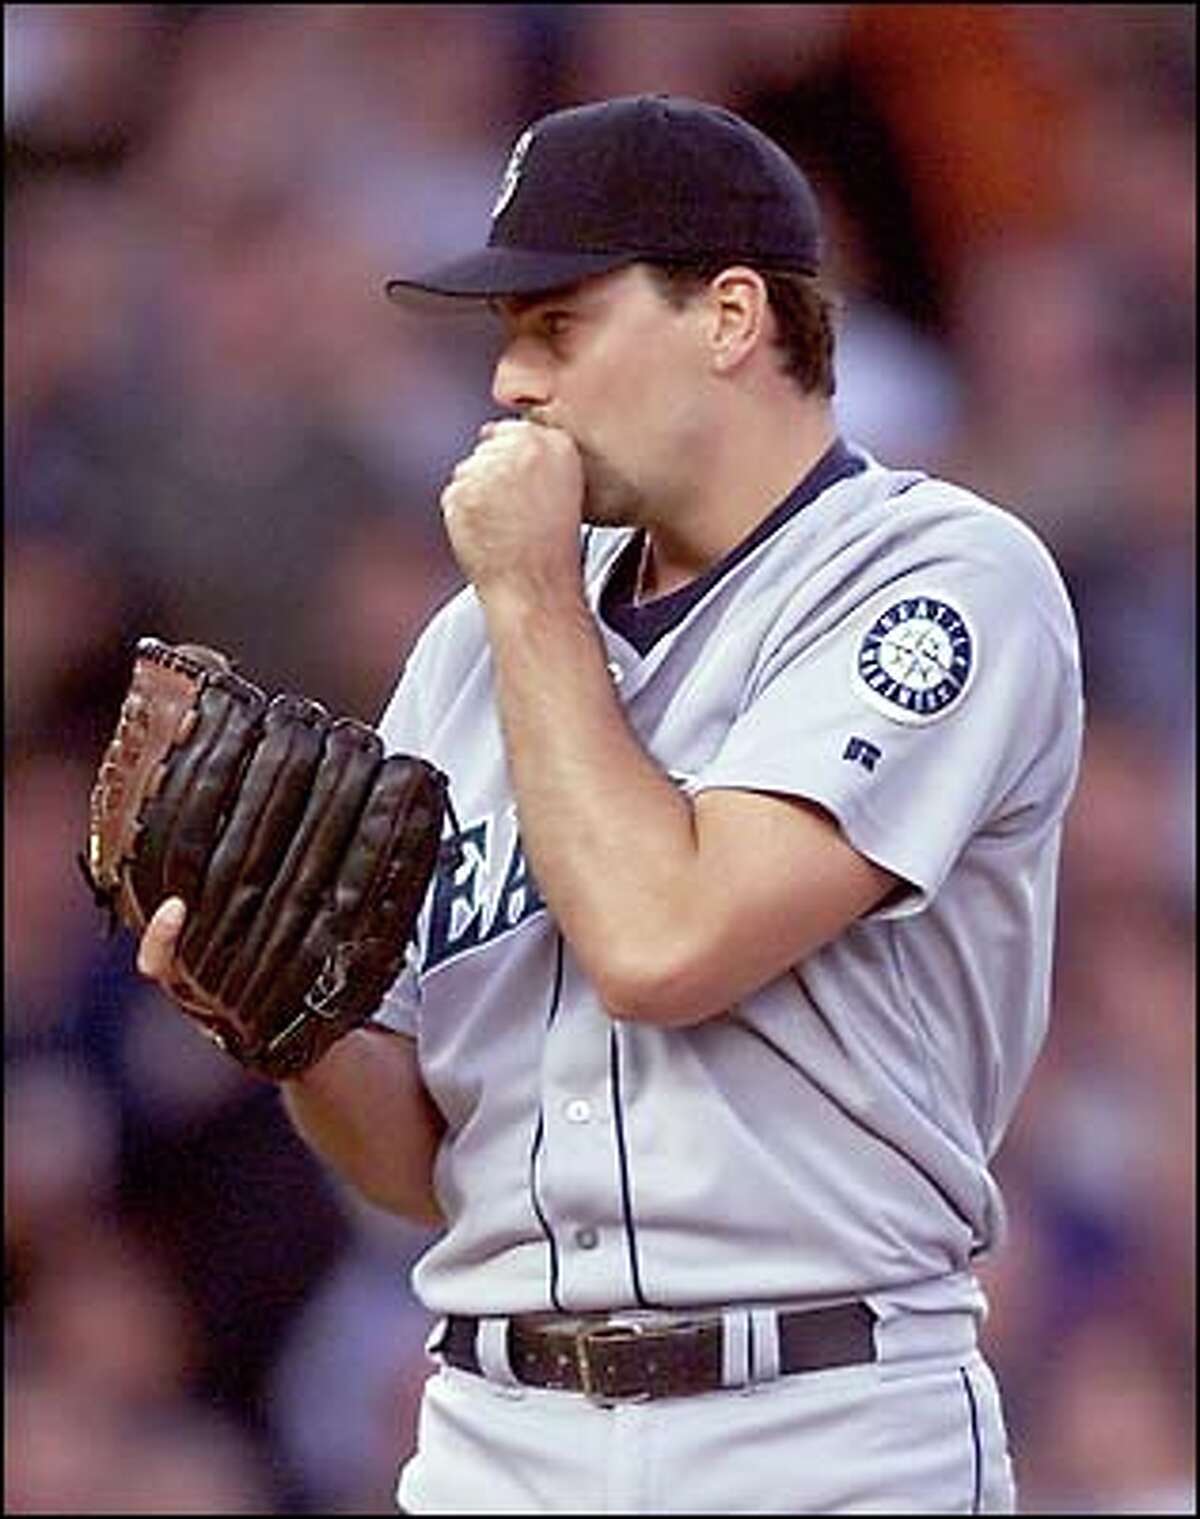 Mariners starter John Halama tries to keep his hands warm between pitches.